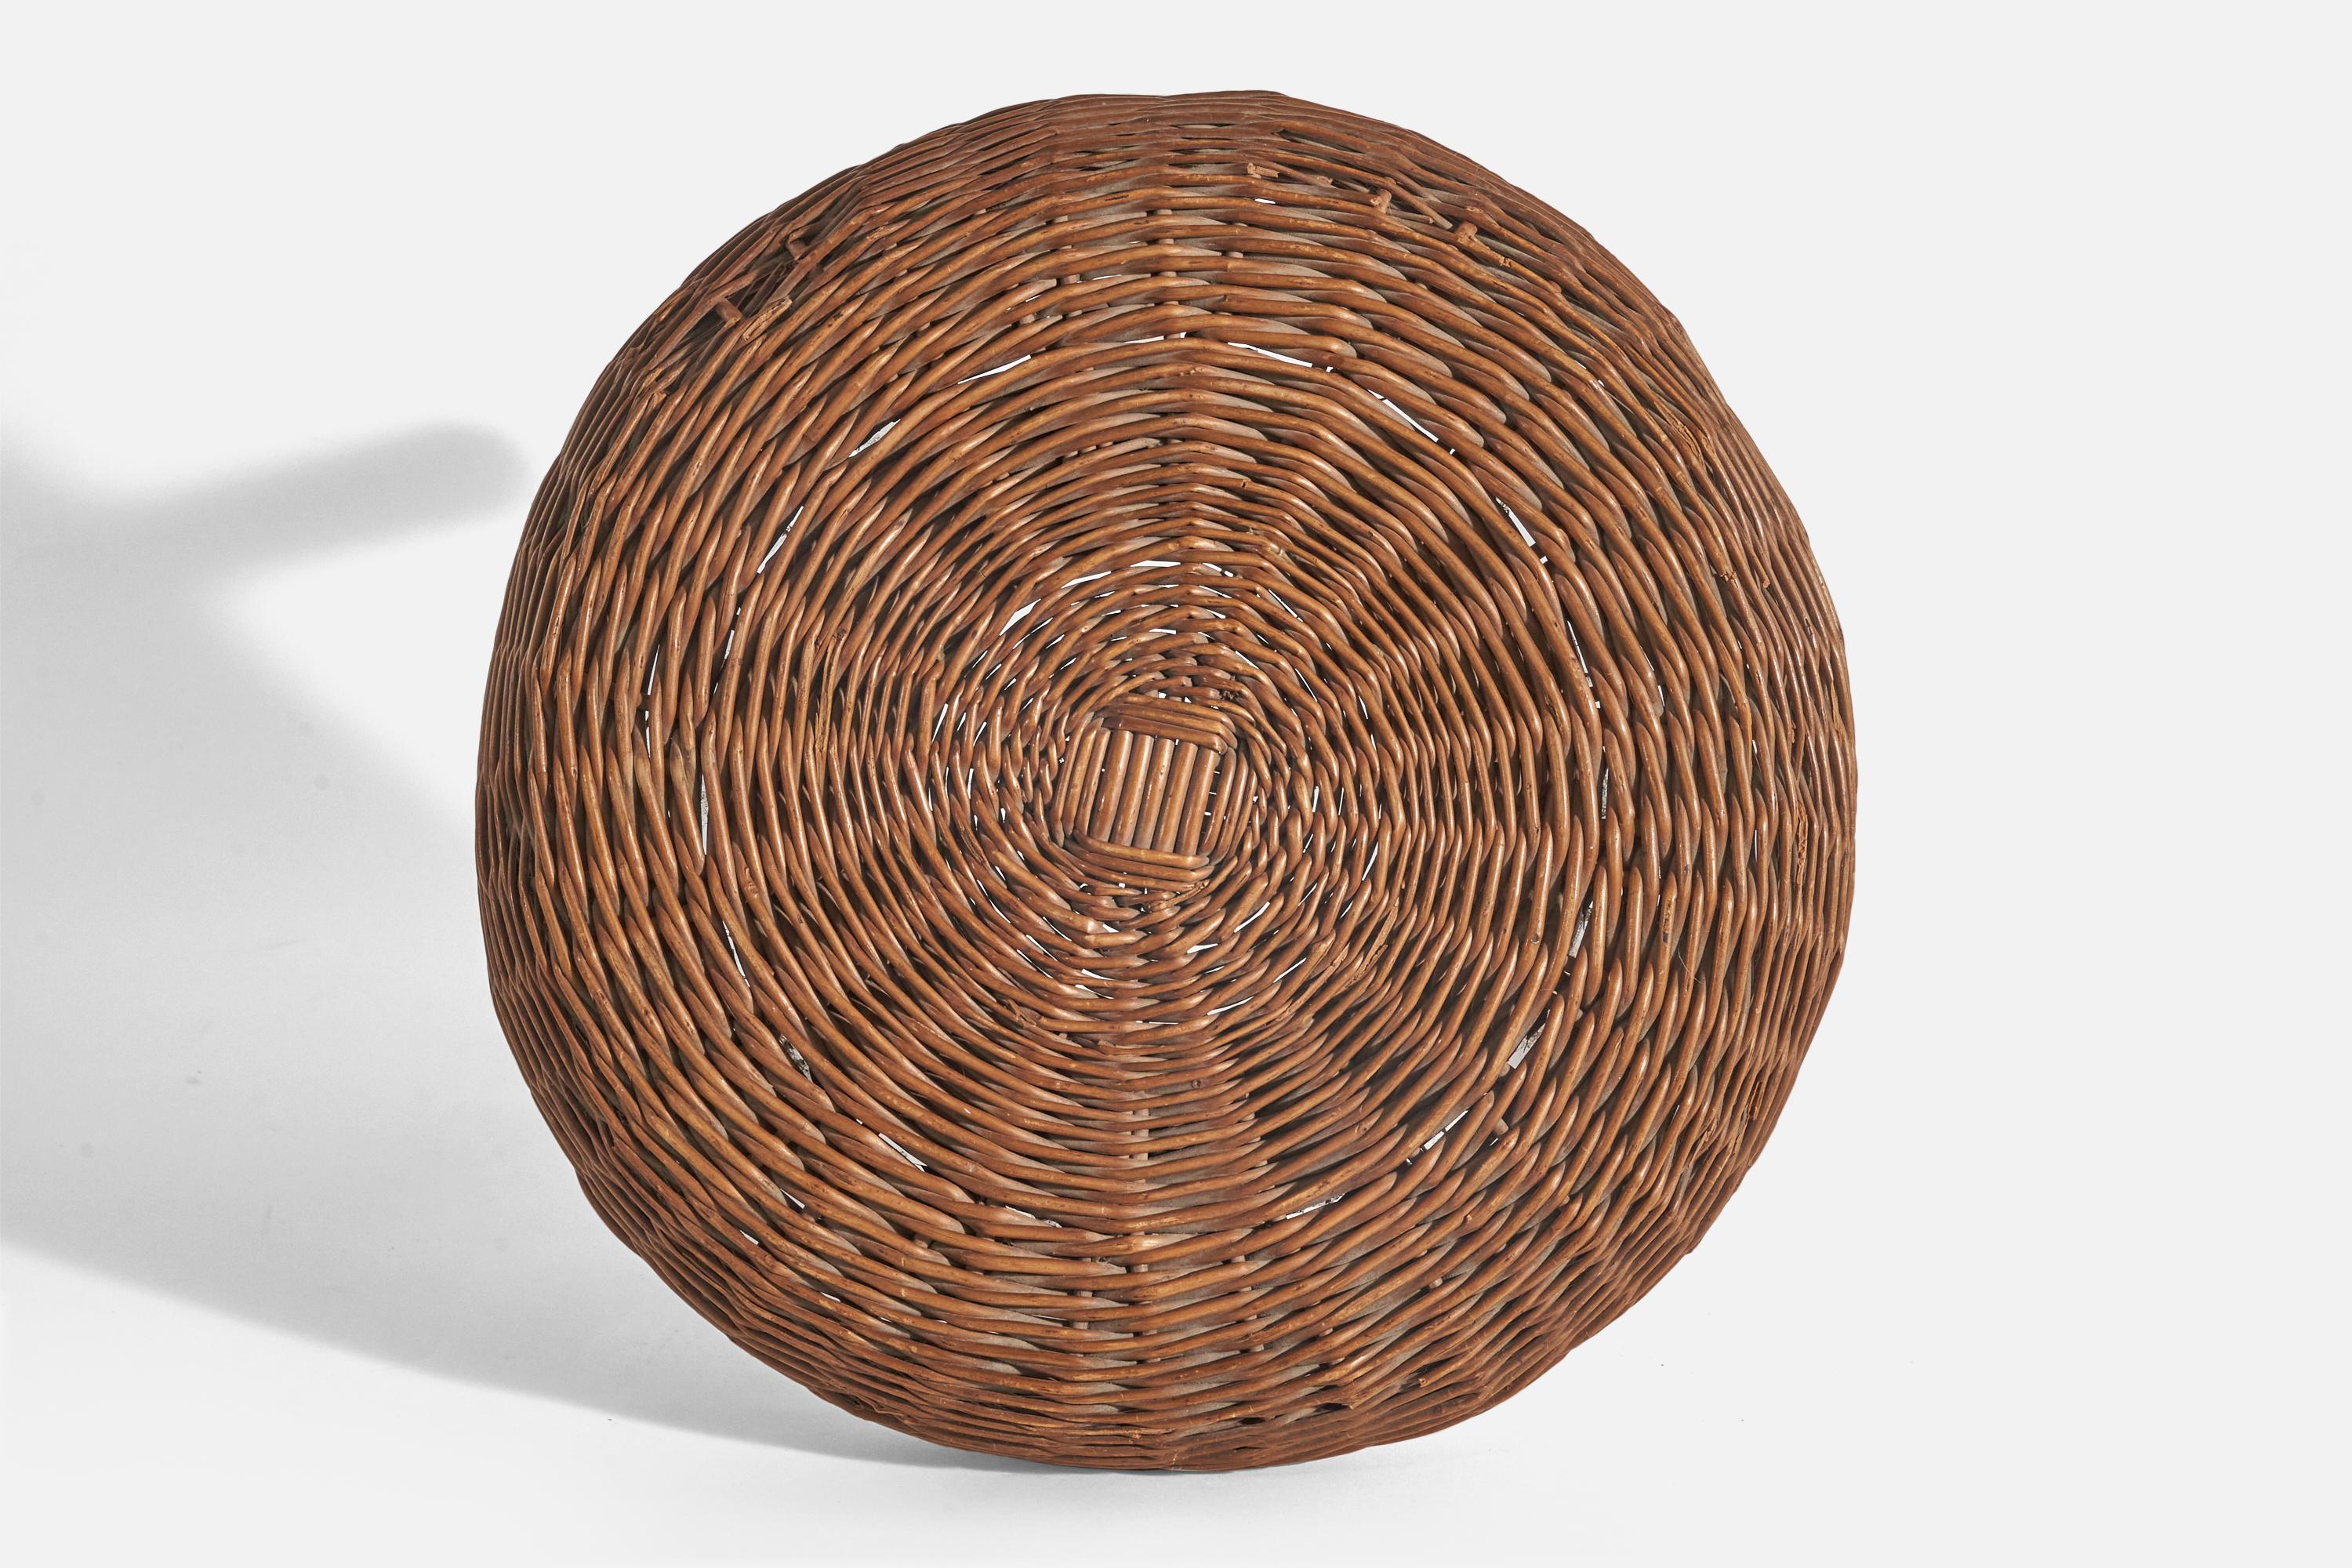 Tony Paul Attribution, Stool, Wicker, Wood, United States, 1950s In Good Condition For Sale In High Point, NC